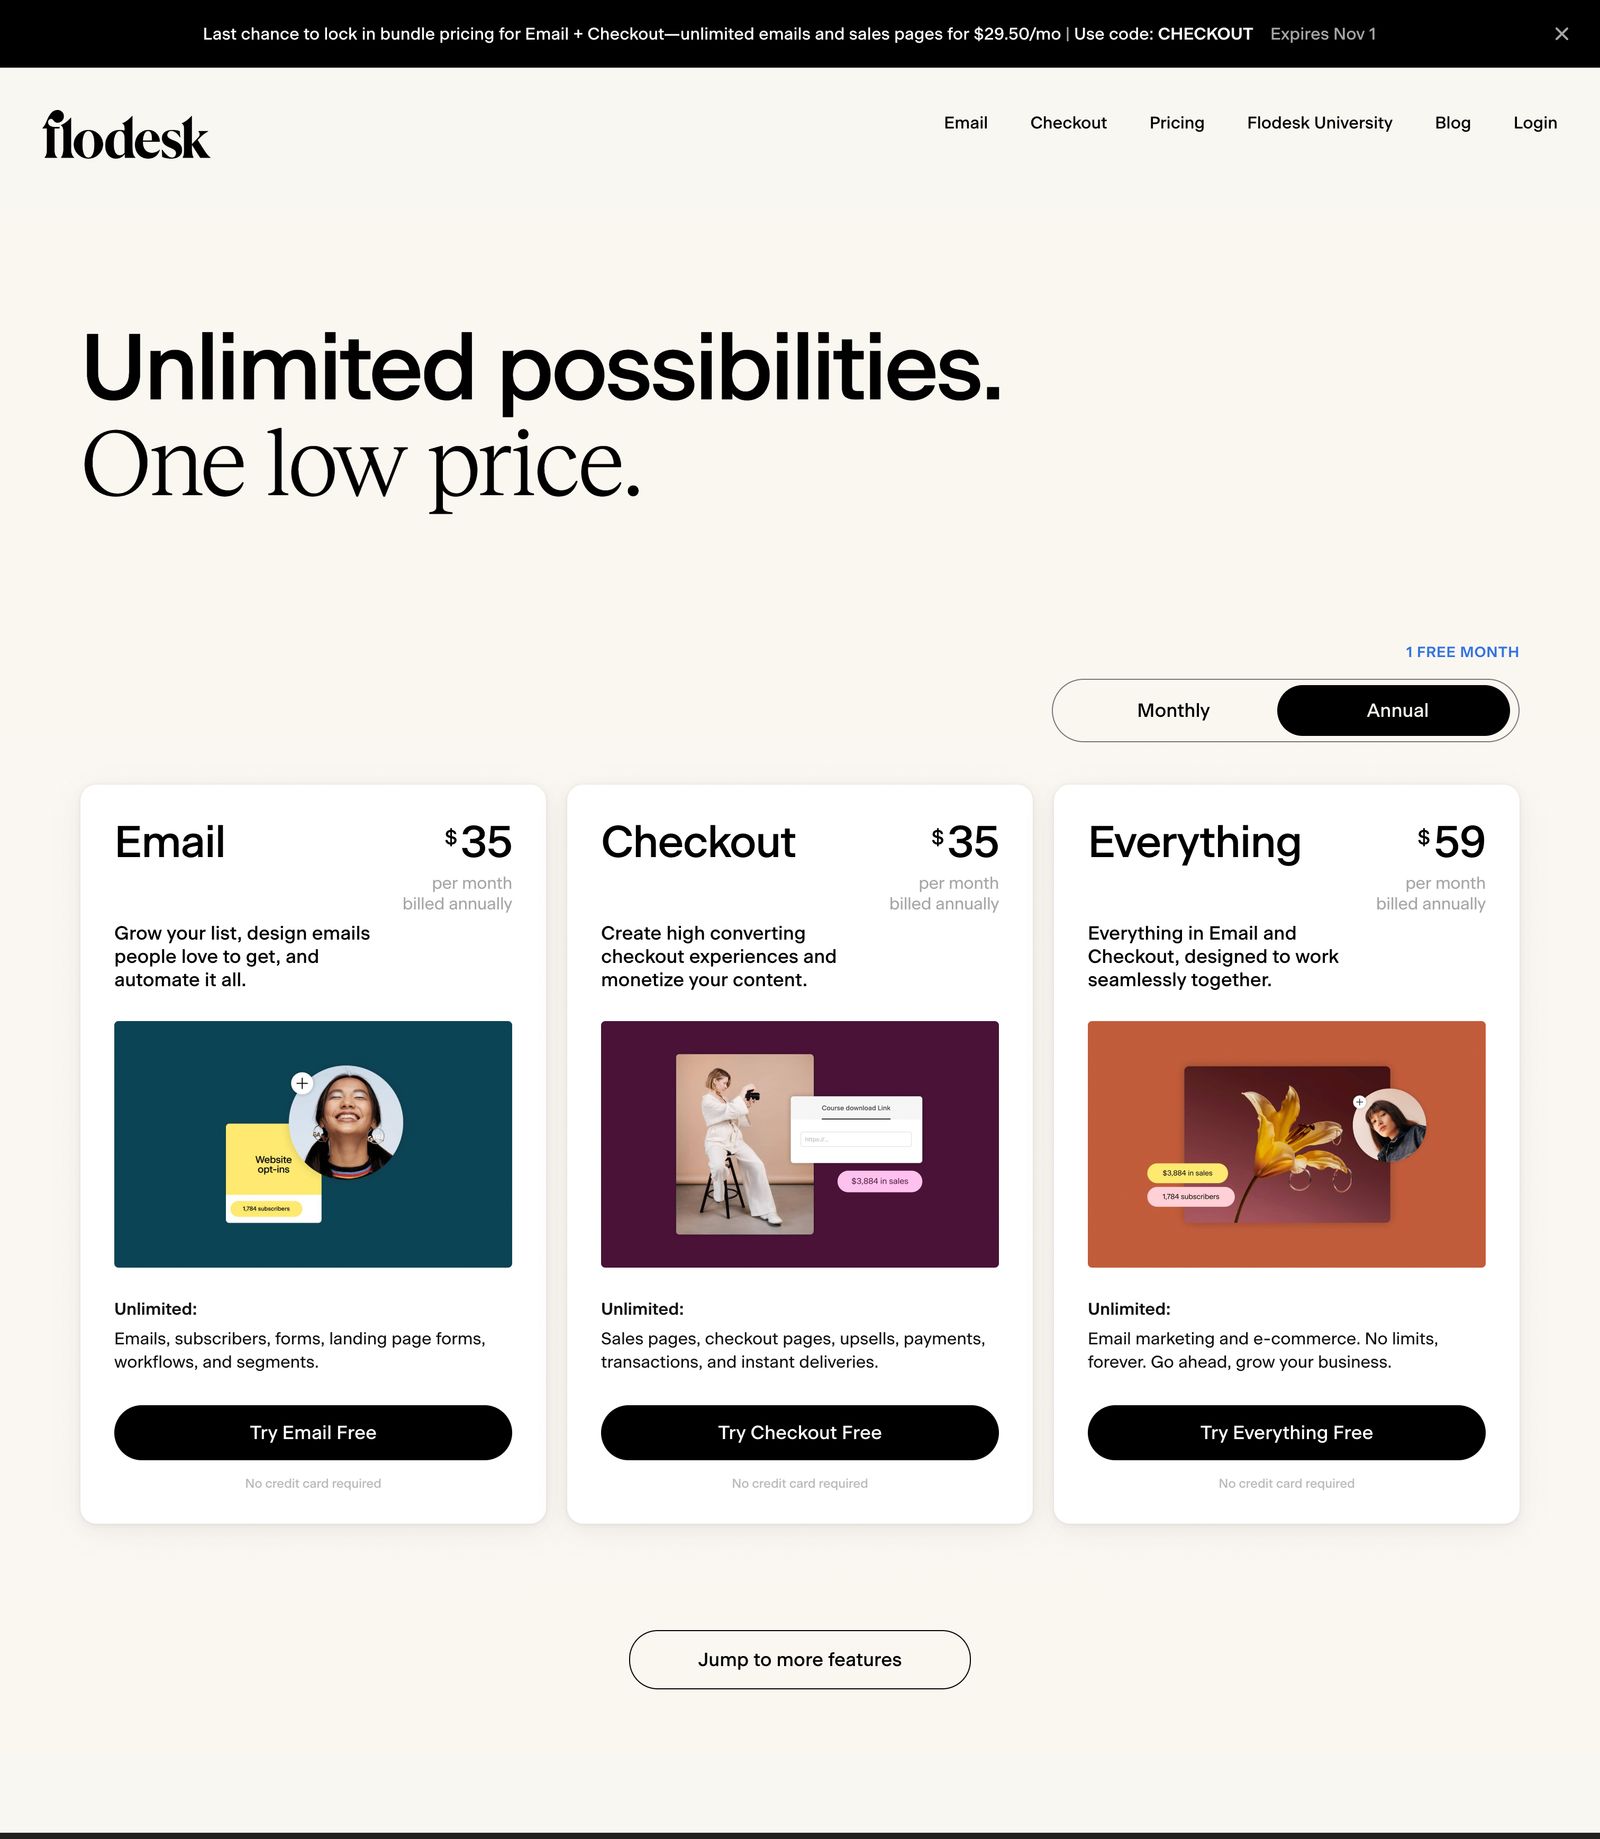 /articles/pricing-page-inspiration/pricing-page-design-example-2.jpg)_Pricing page example from Flodesk